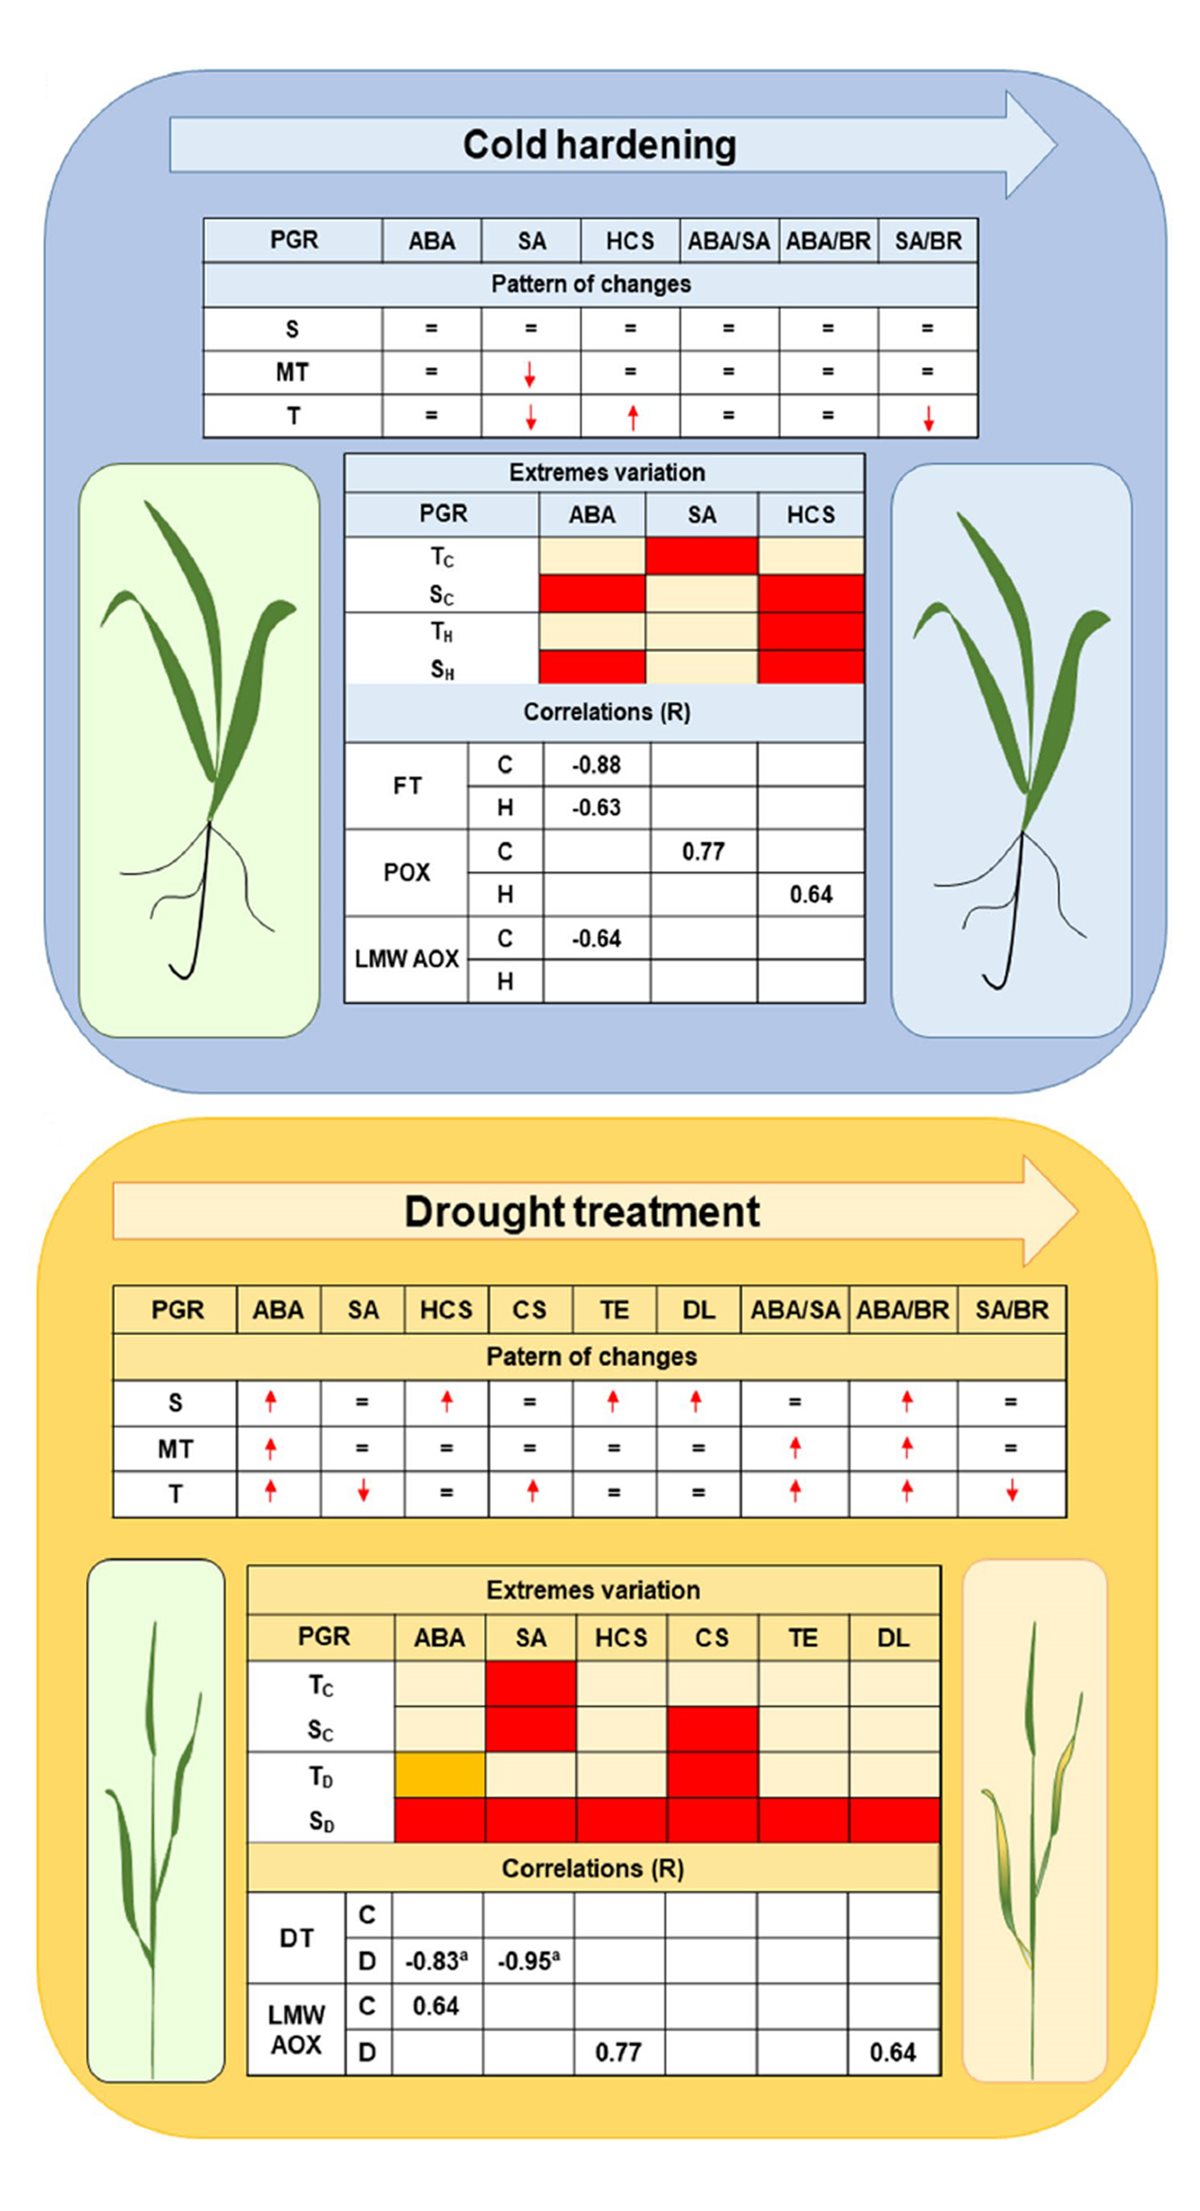 New publication: Involvement of homocastasterone, salicylic and abscisic acids in the regulation of drought and freezing tolerance in doubled haploid lines of winter barley